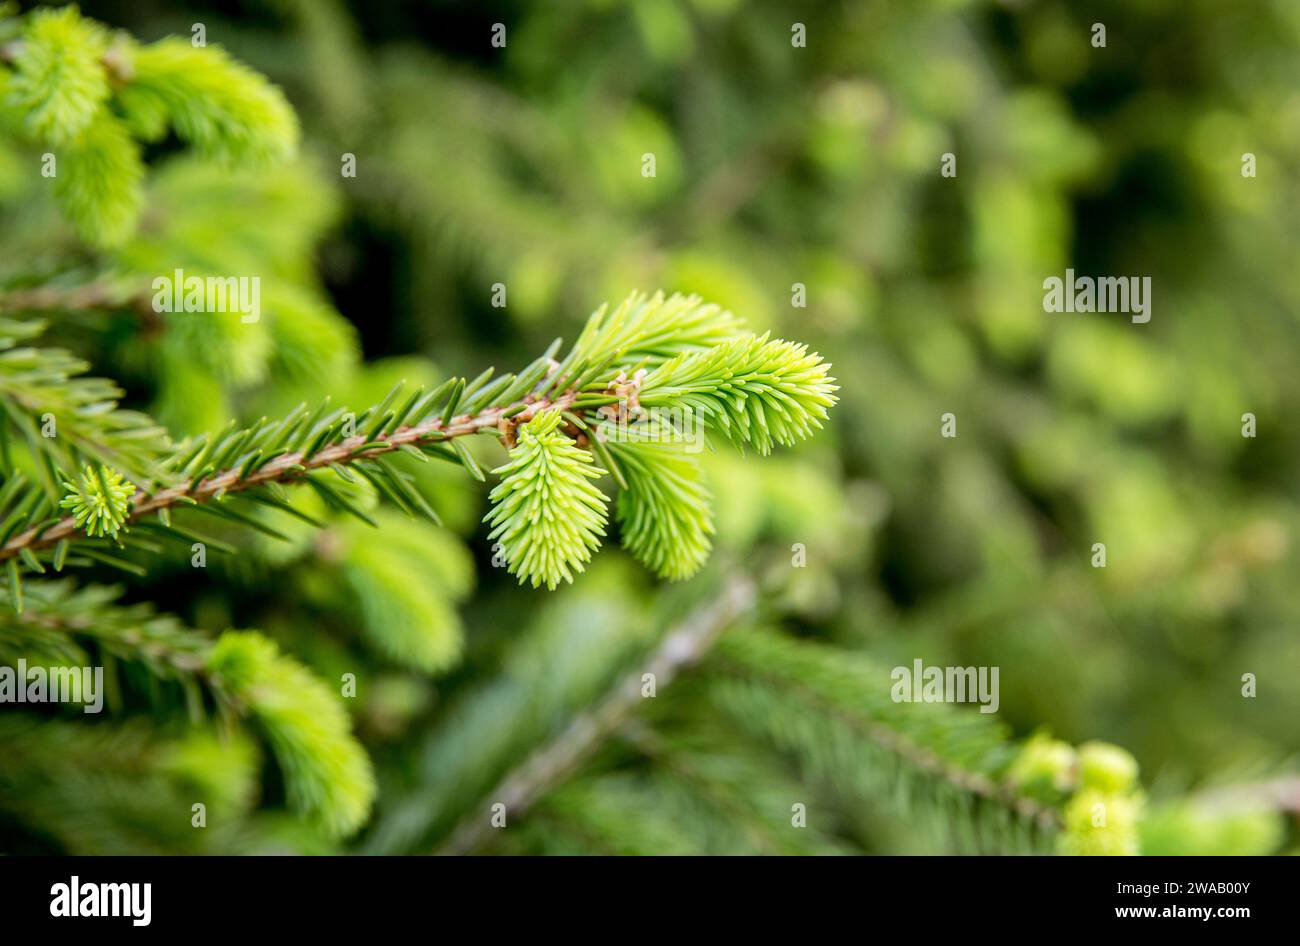 Spruce tree Picea fresh tips in spring outdoors from growing spruce tree. Food and herbal medicine ingredients. Stock Photo